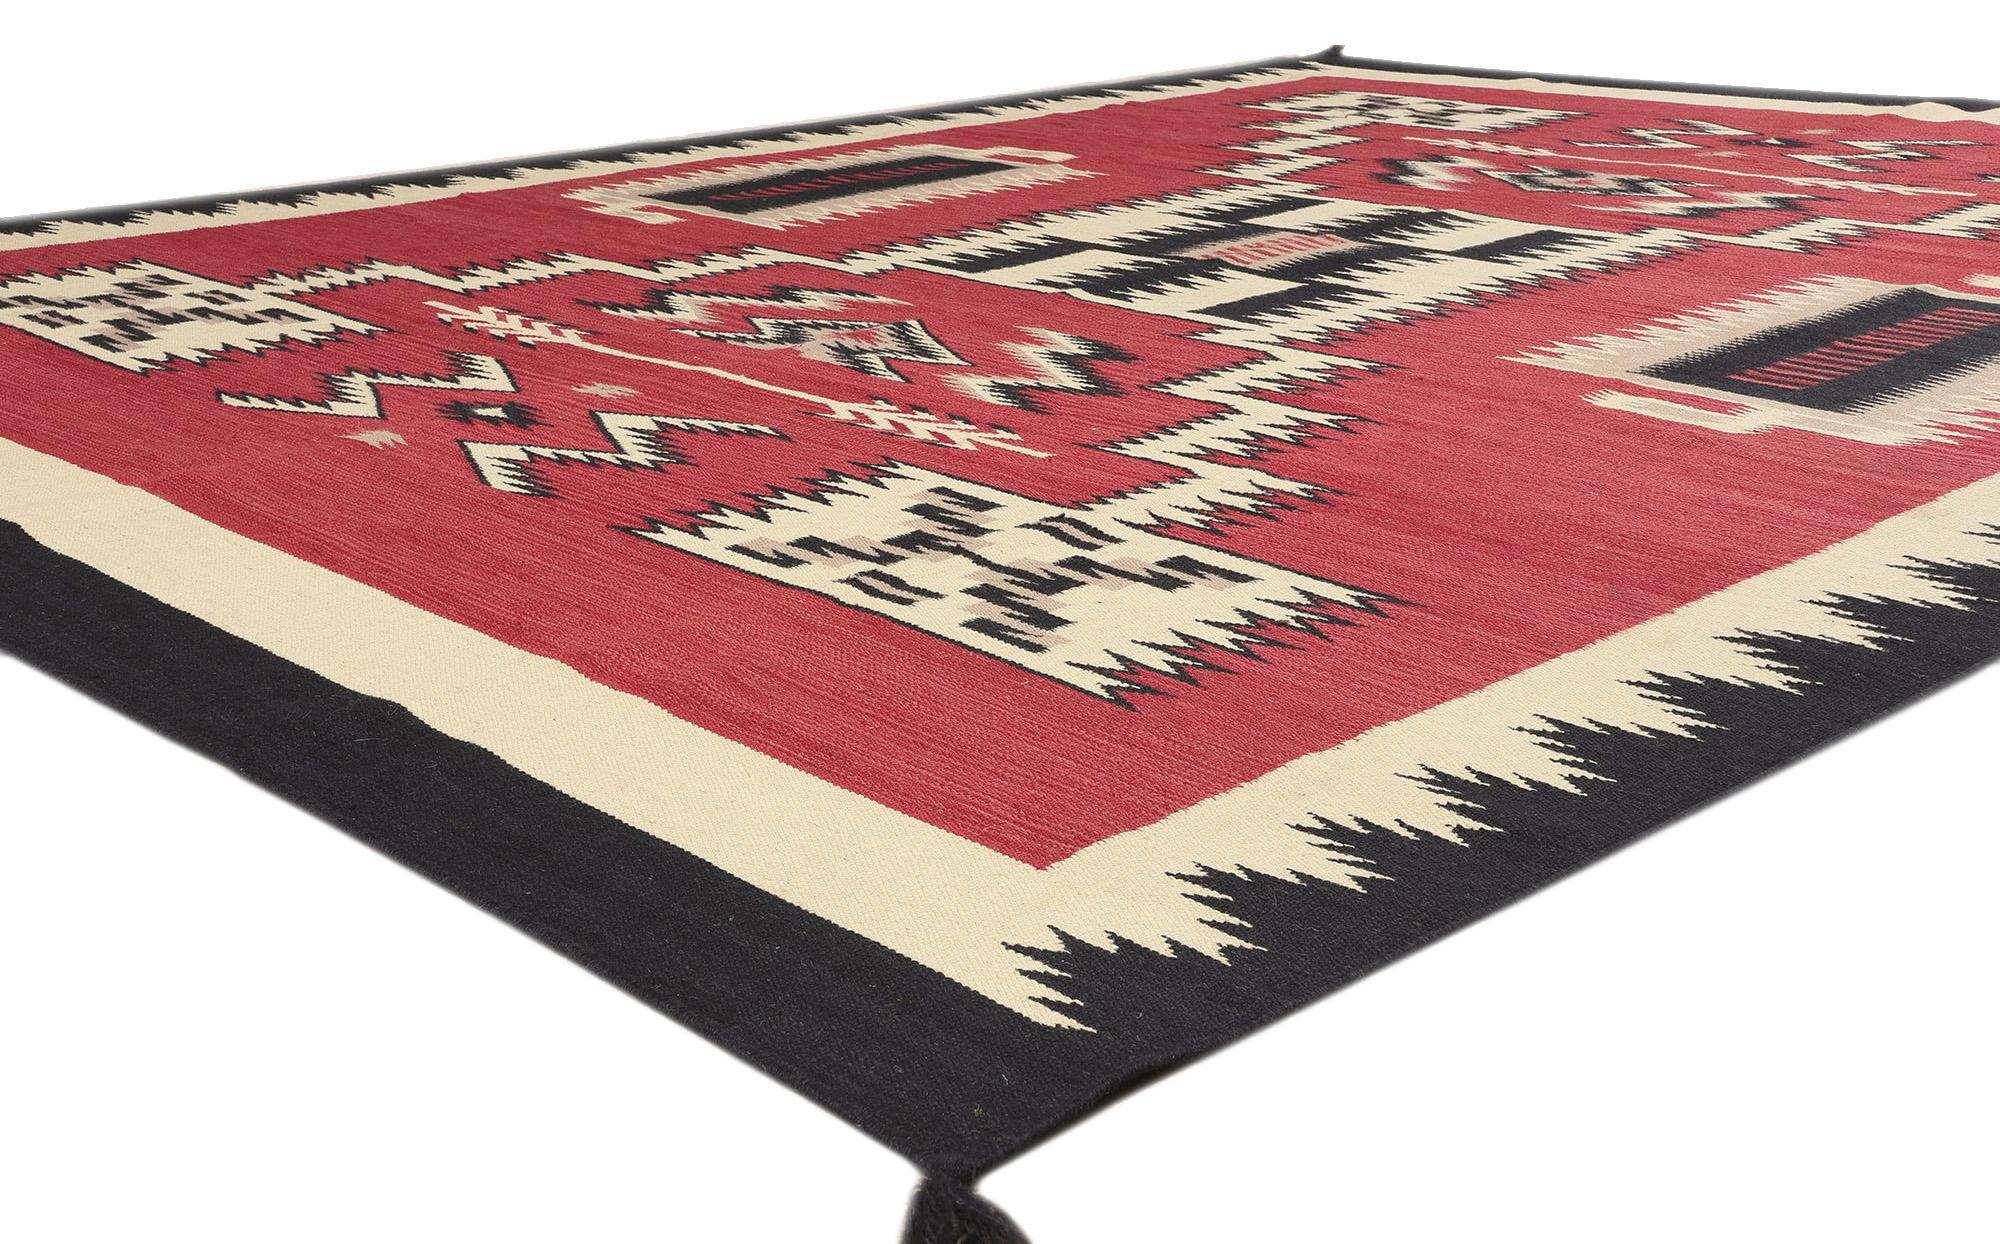 81024 Southwestern Red Navajo-Style Rug with Storm Pattern, 09'00 x 11'09. Step into the captivating realm of contemporary Native American design aesthetics, where masculine geometry is balanced by feminine intricacy in this meticulously handwoven